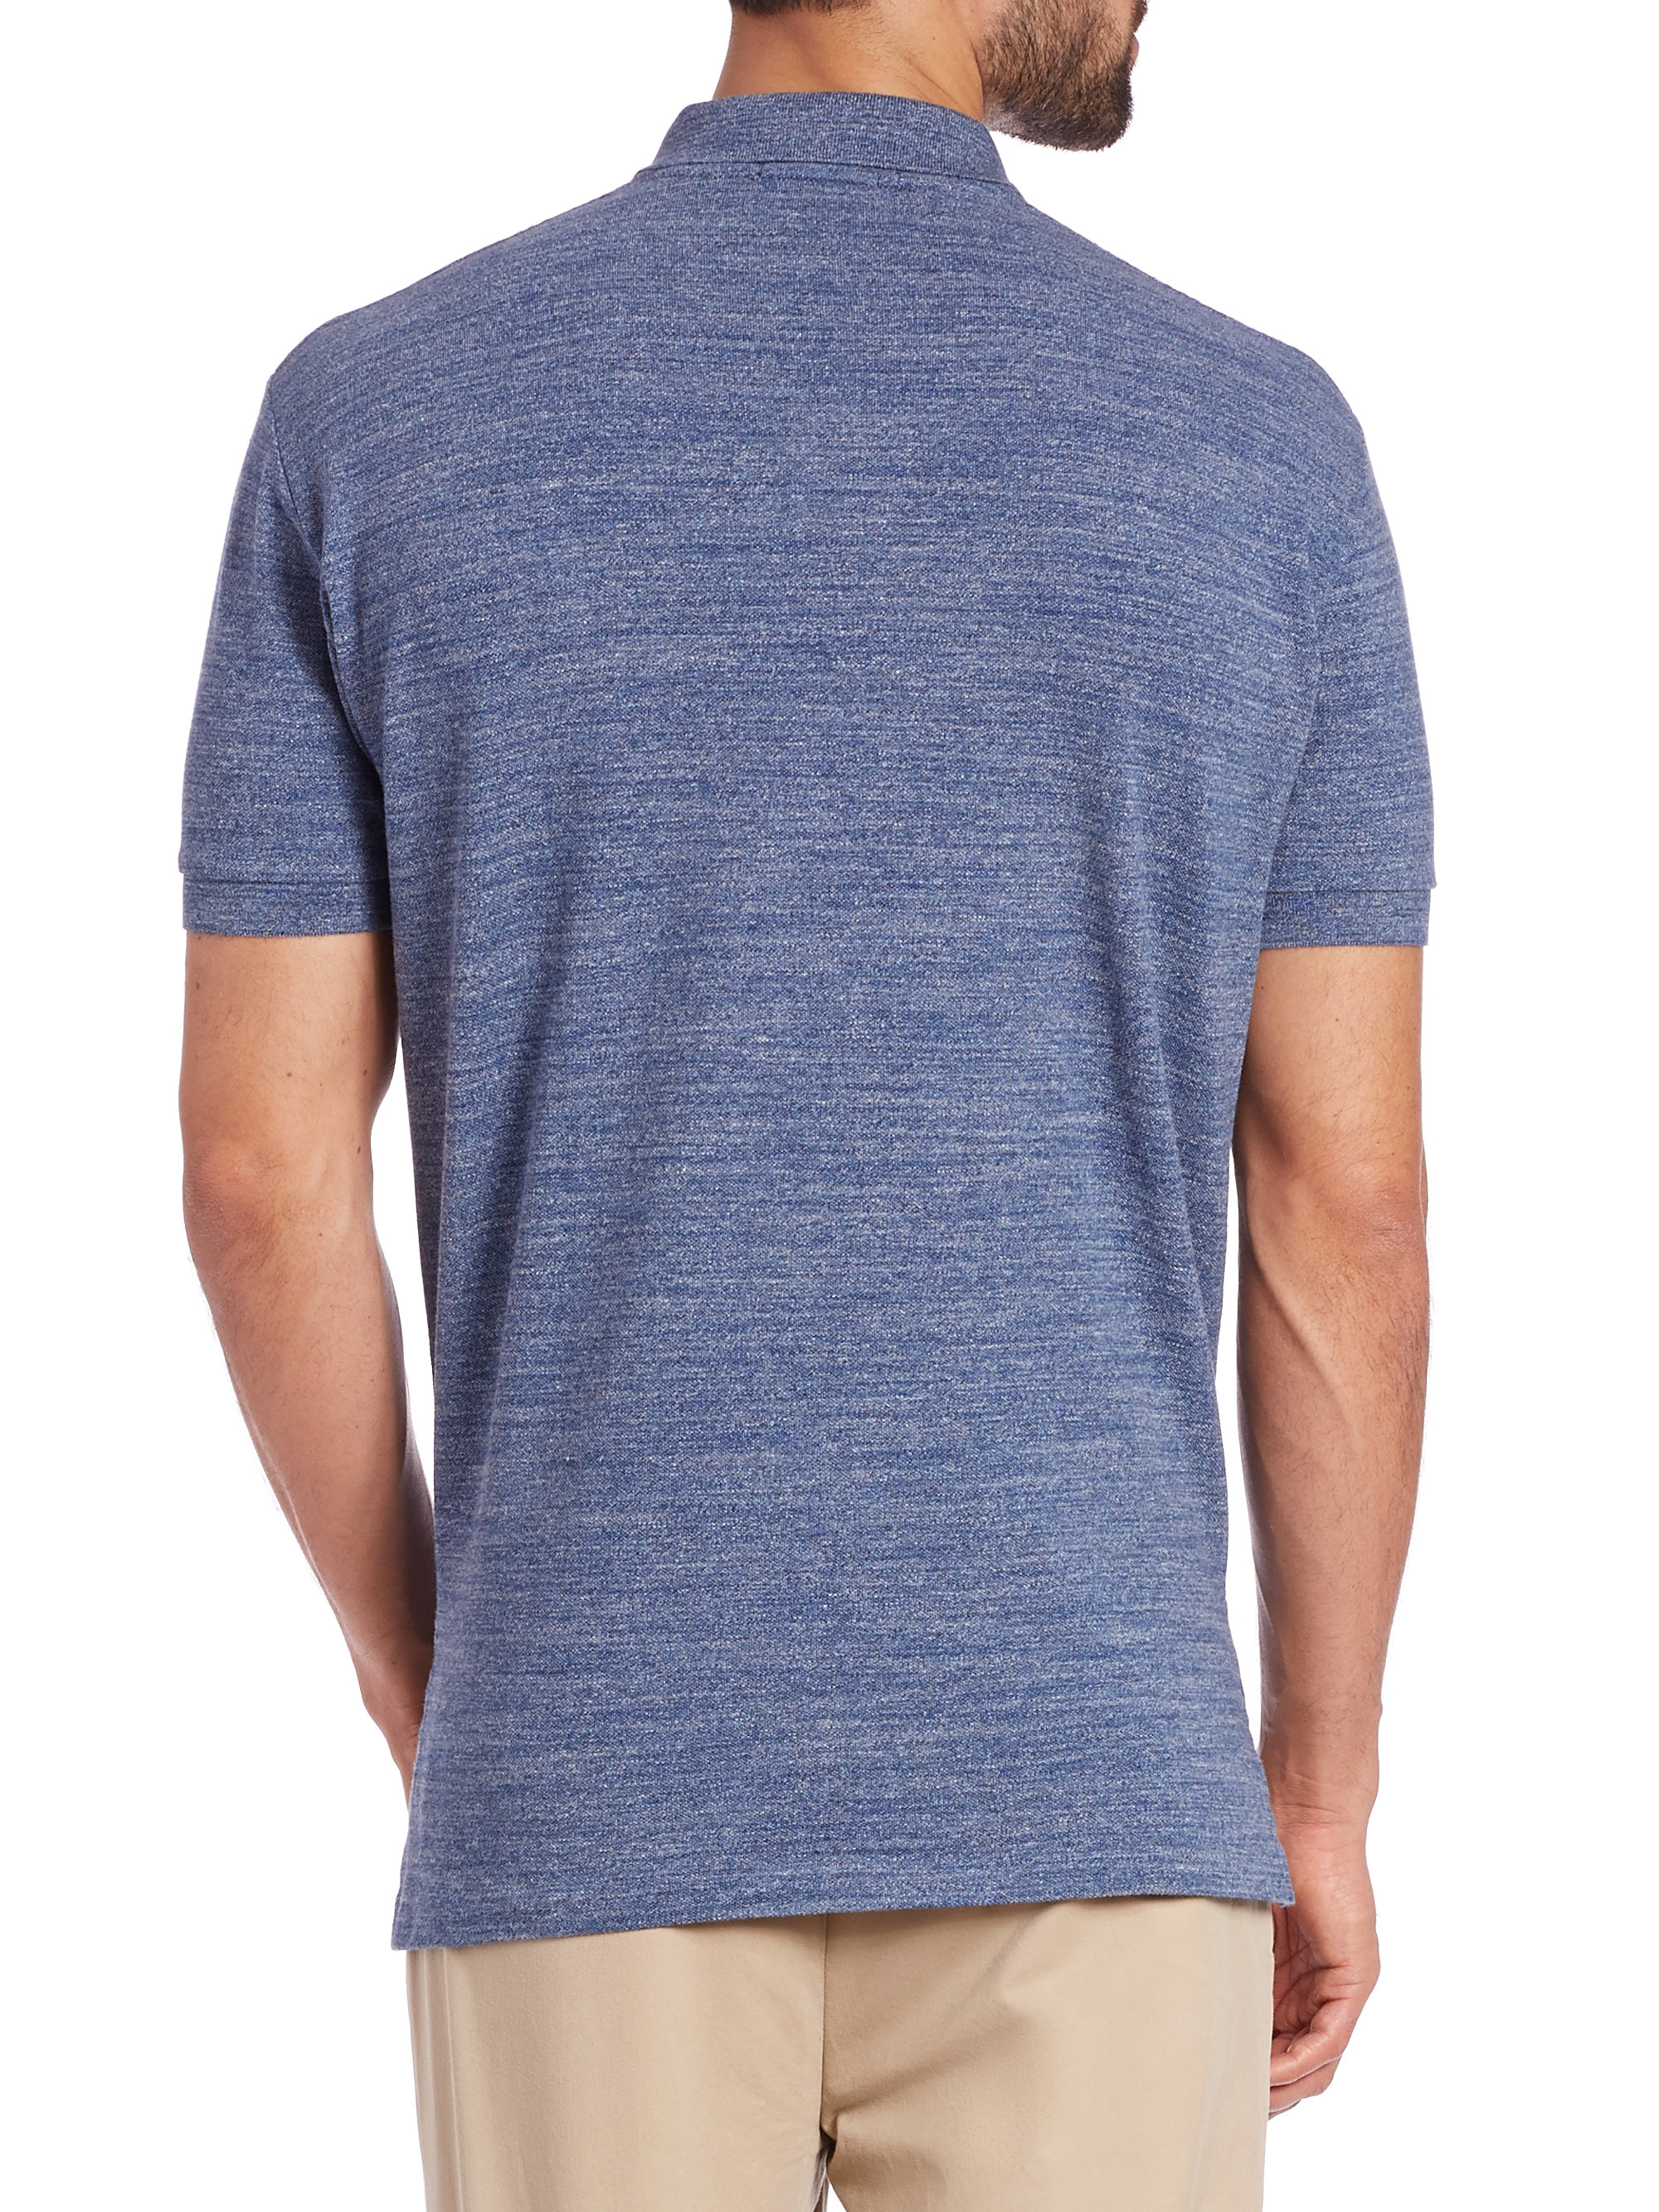 Lyst - Polo Ralph Lauren Heathered Polo Shirt in Blue for Men